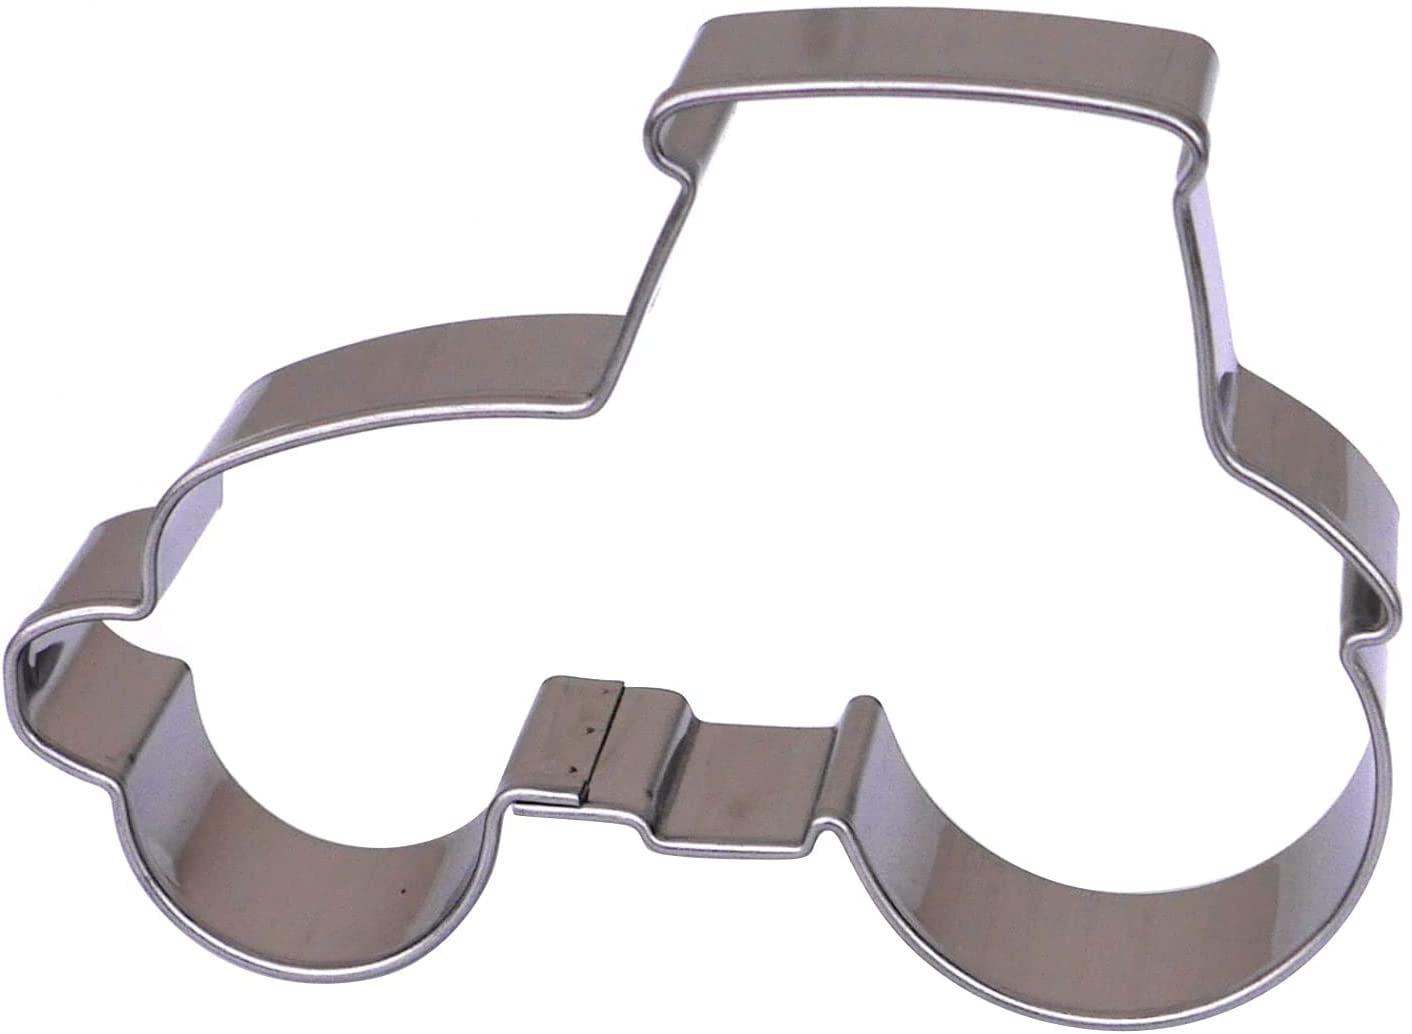 Details about   Tractor Cookie Cutter Stainless Steel 